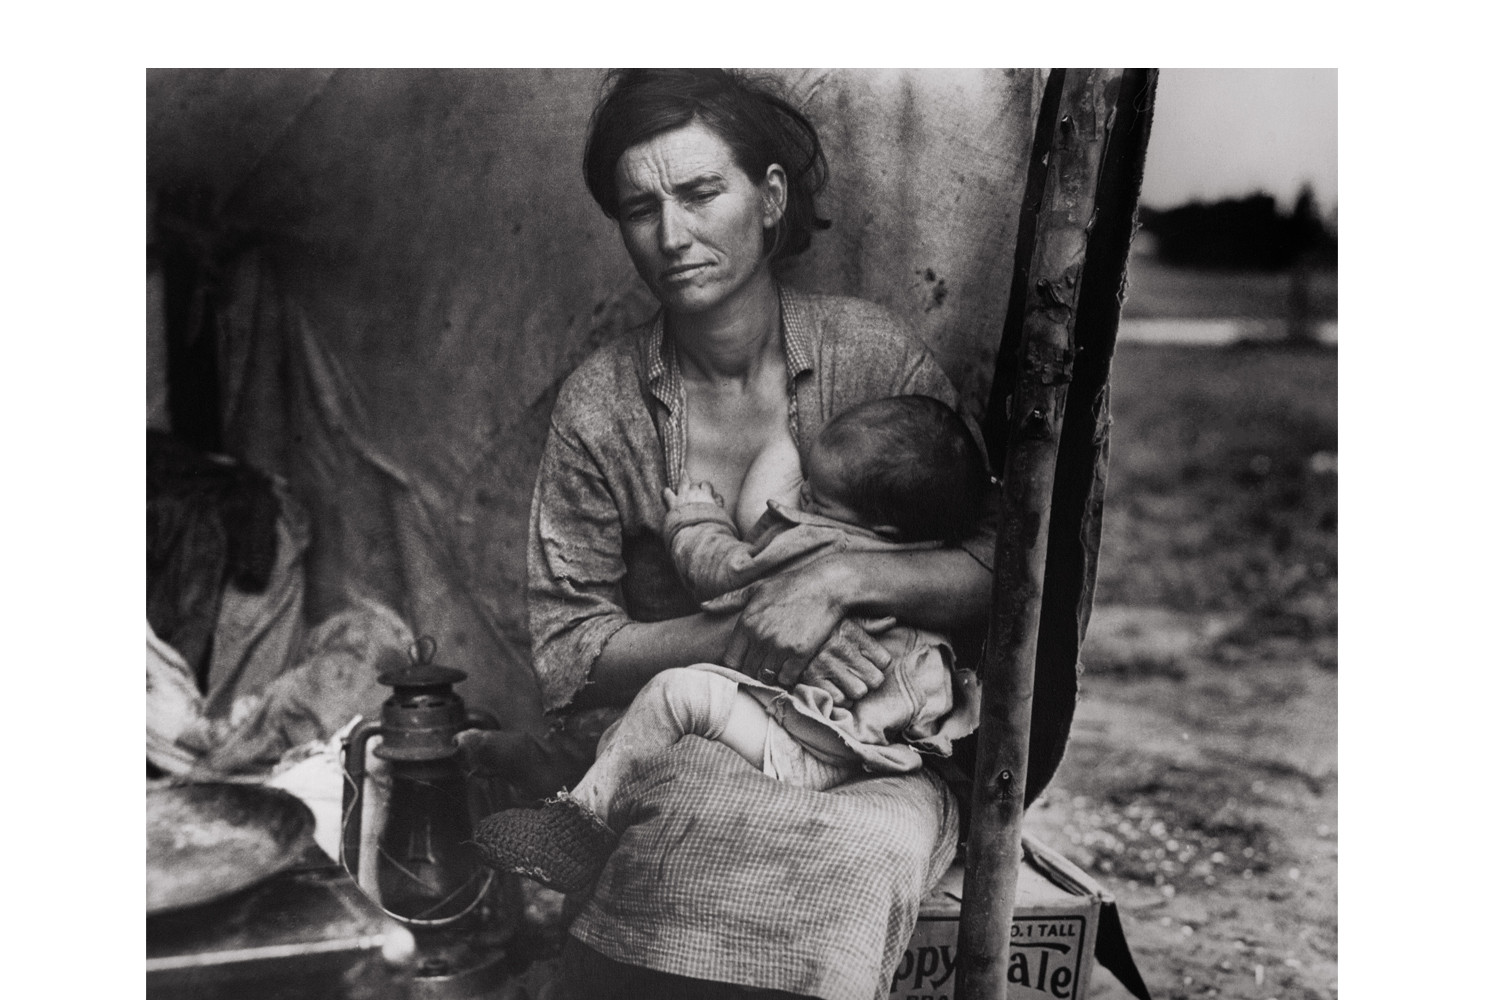 FROM THE MIGRANT MOTHER
SEQUENCE, IMAGE #3, NIPOMO,
CA. MIGRANT AGRICULTURAL
WORKER'S FAMILY. SEVEN
HUNGRY CHILDREN. MOTHER
AGED THIRTY-TWO. FATHER IS
NATIVE CALIFORNIAN. NIPOMO,
CA. FSA., 1936, by Dorothea Lange (American, 1895 – 1965). Gelatin silver print, 11 x 14 inches. Courtesy of the Collection Martin Z.  Margulies.